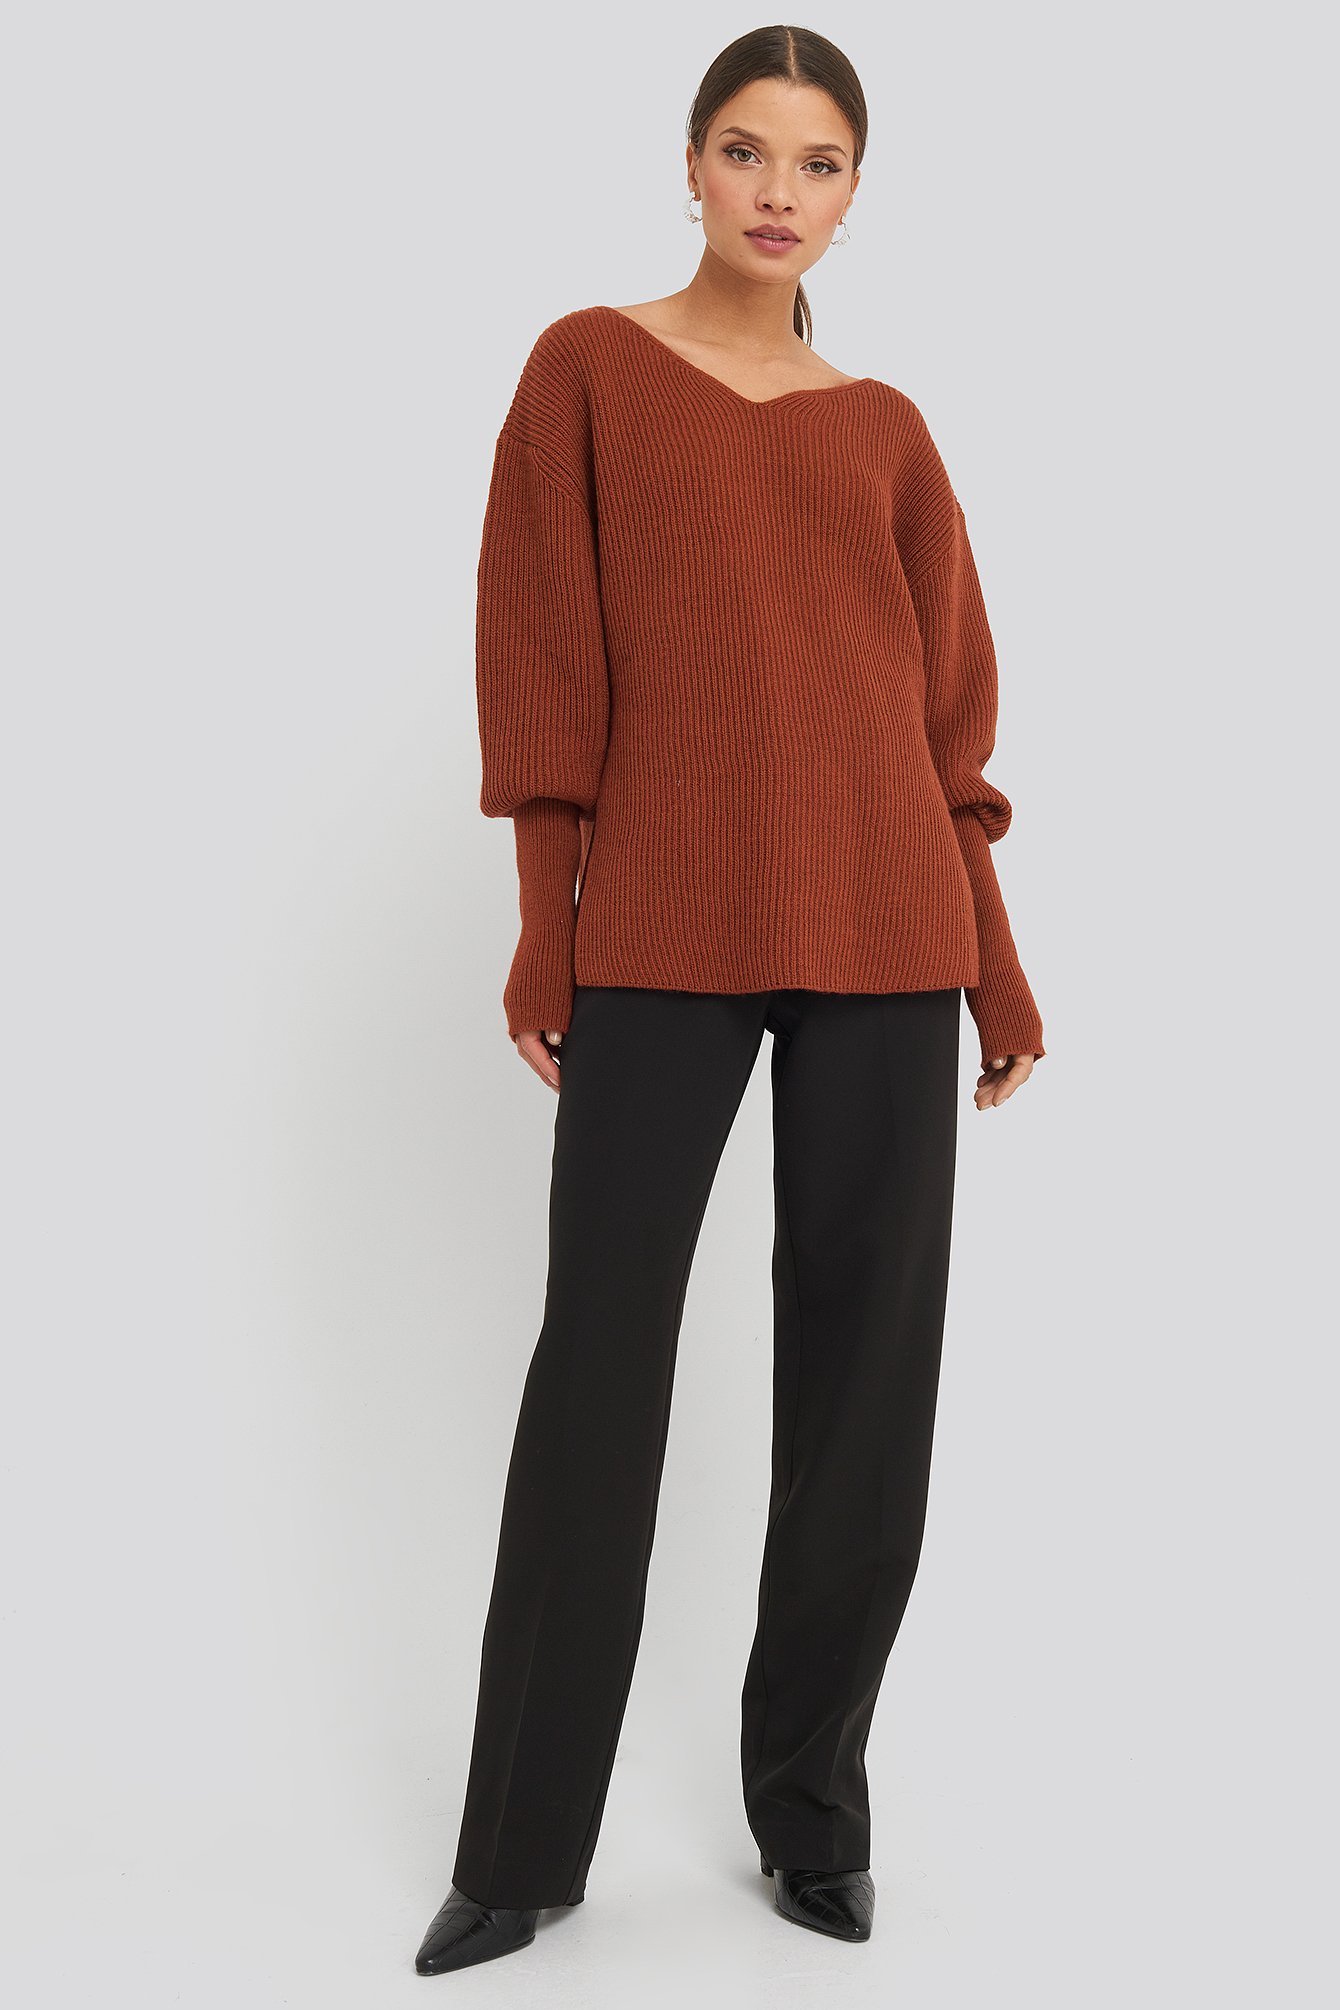 Notched Neckline Ribbed Sweater Outfit.